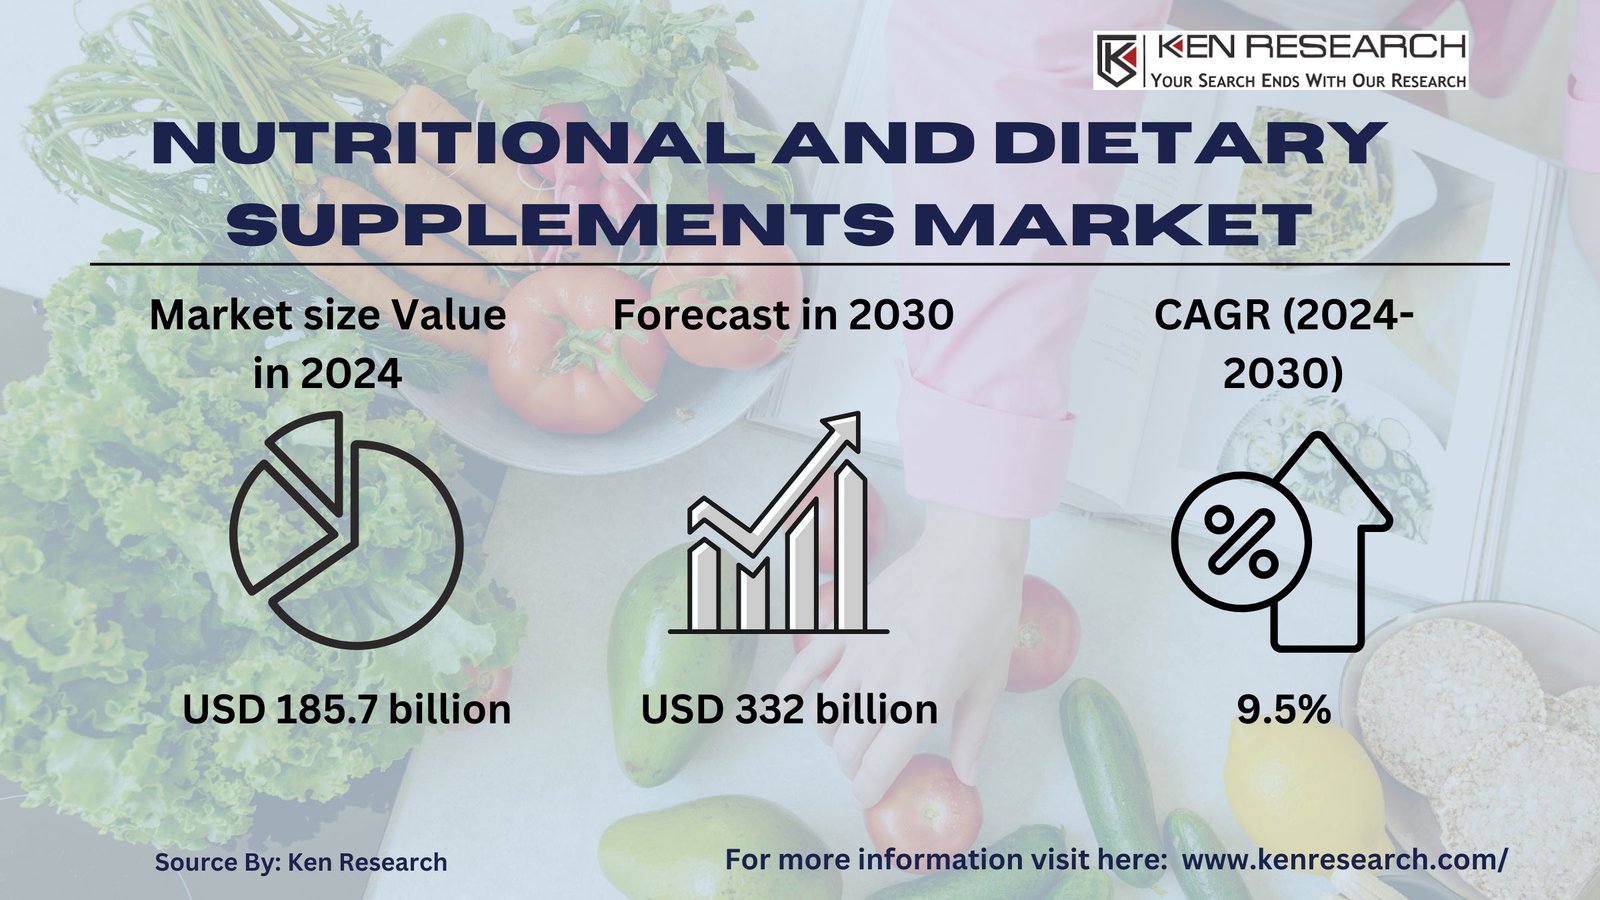 Nutritional and Dietary Supplements Market